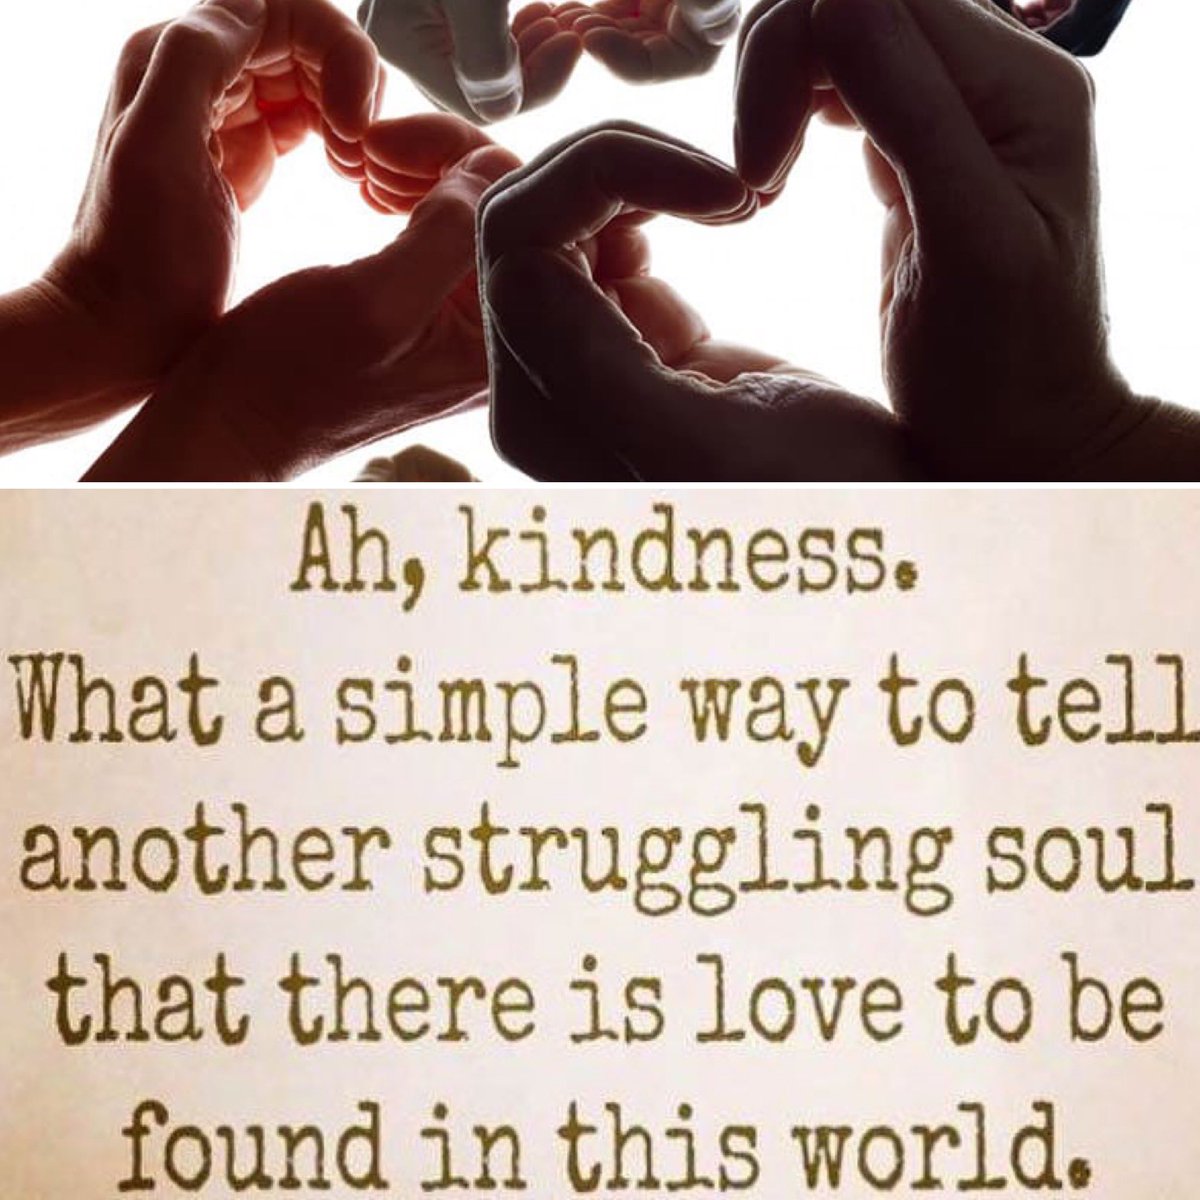 Being kind is more than simply being nice to others. It’s about … - showing empathy, compassion & understanding. - treating others the way we would like to be treated. - recognizing we all have struggles & challenges and that a little bit of kindness can go a long way. 🙏🫶👇